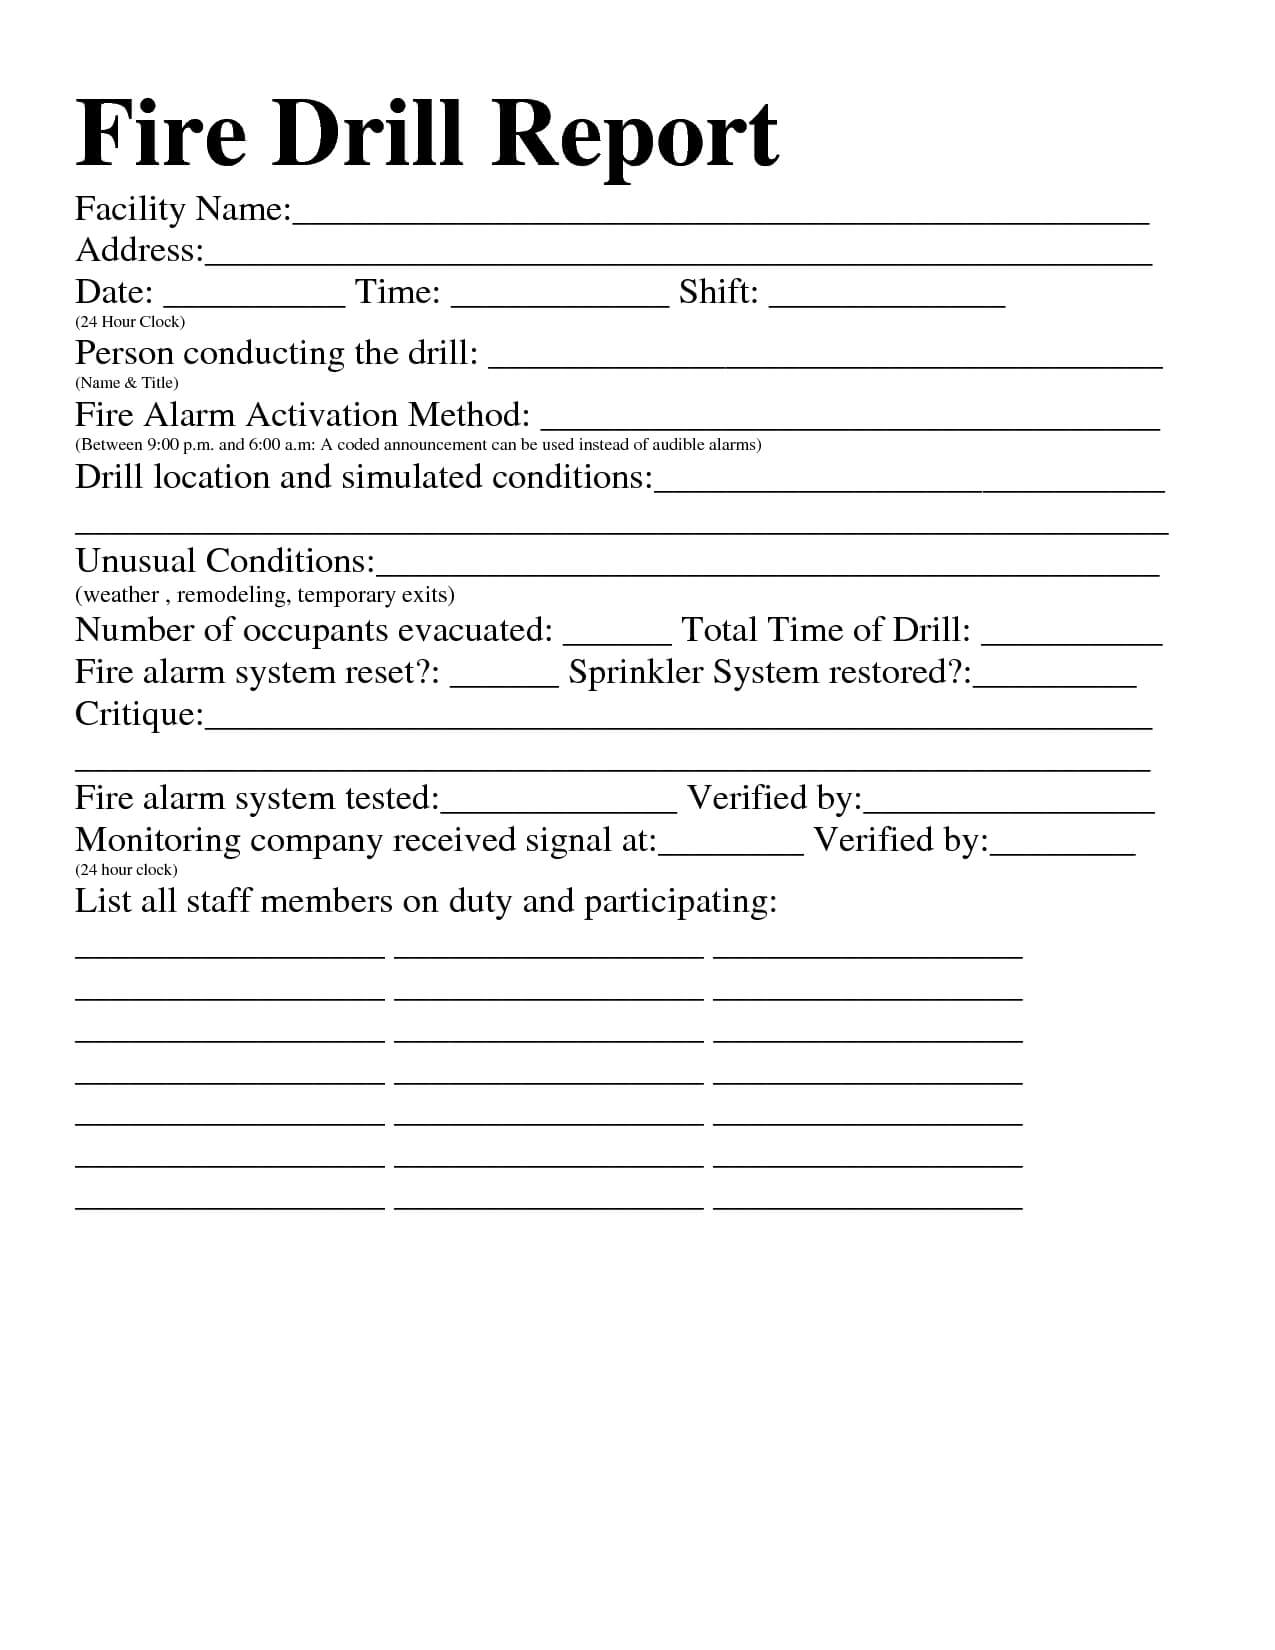 22 Images Of Osha Fire Drill Safety Template | Jackmonster In Emergency Drill Report Template